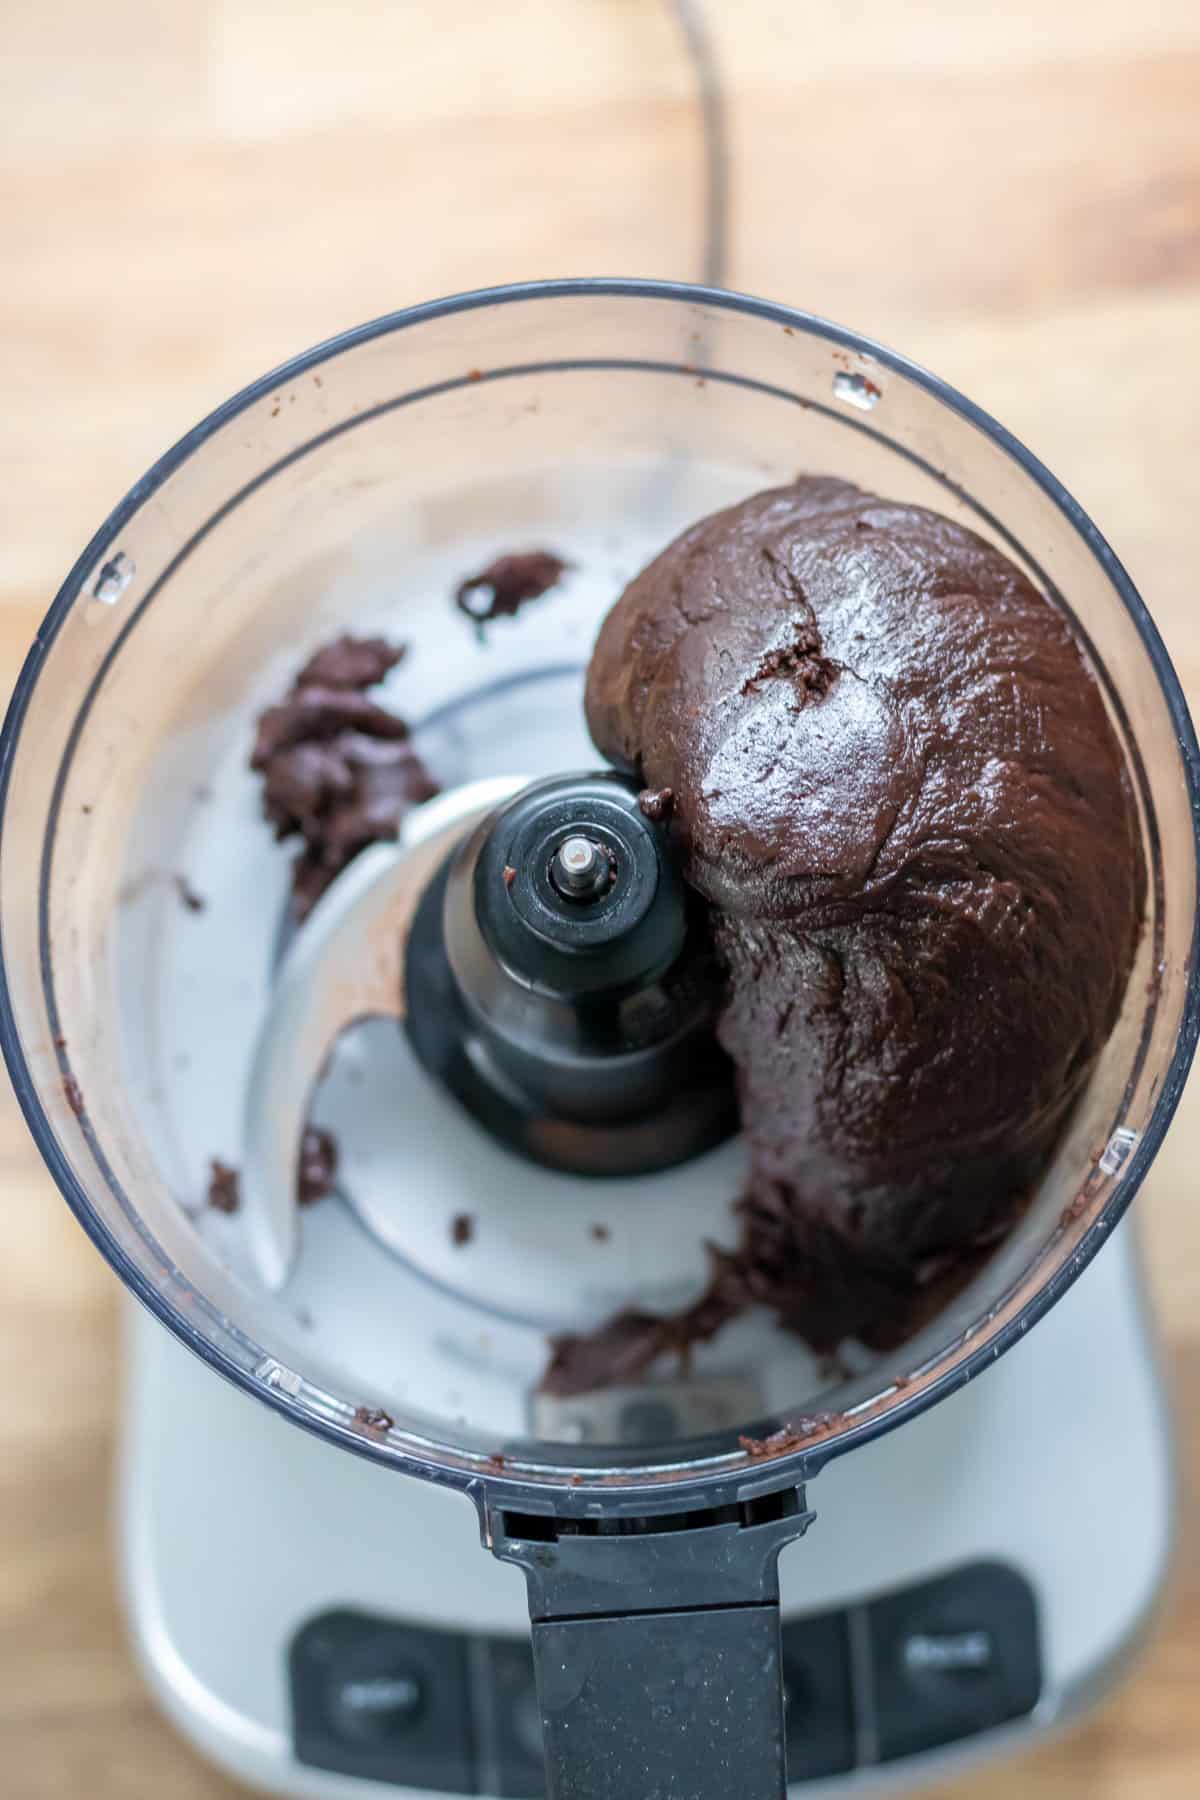 The rum ball dough mixed in a food processor into a thick paste ball.